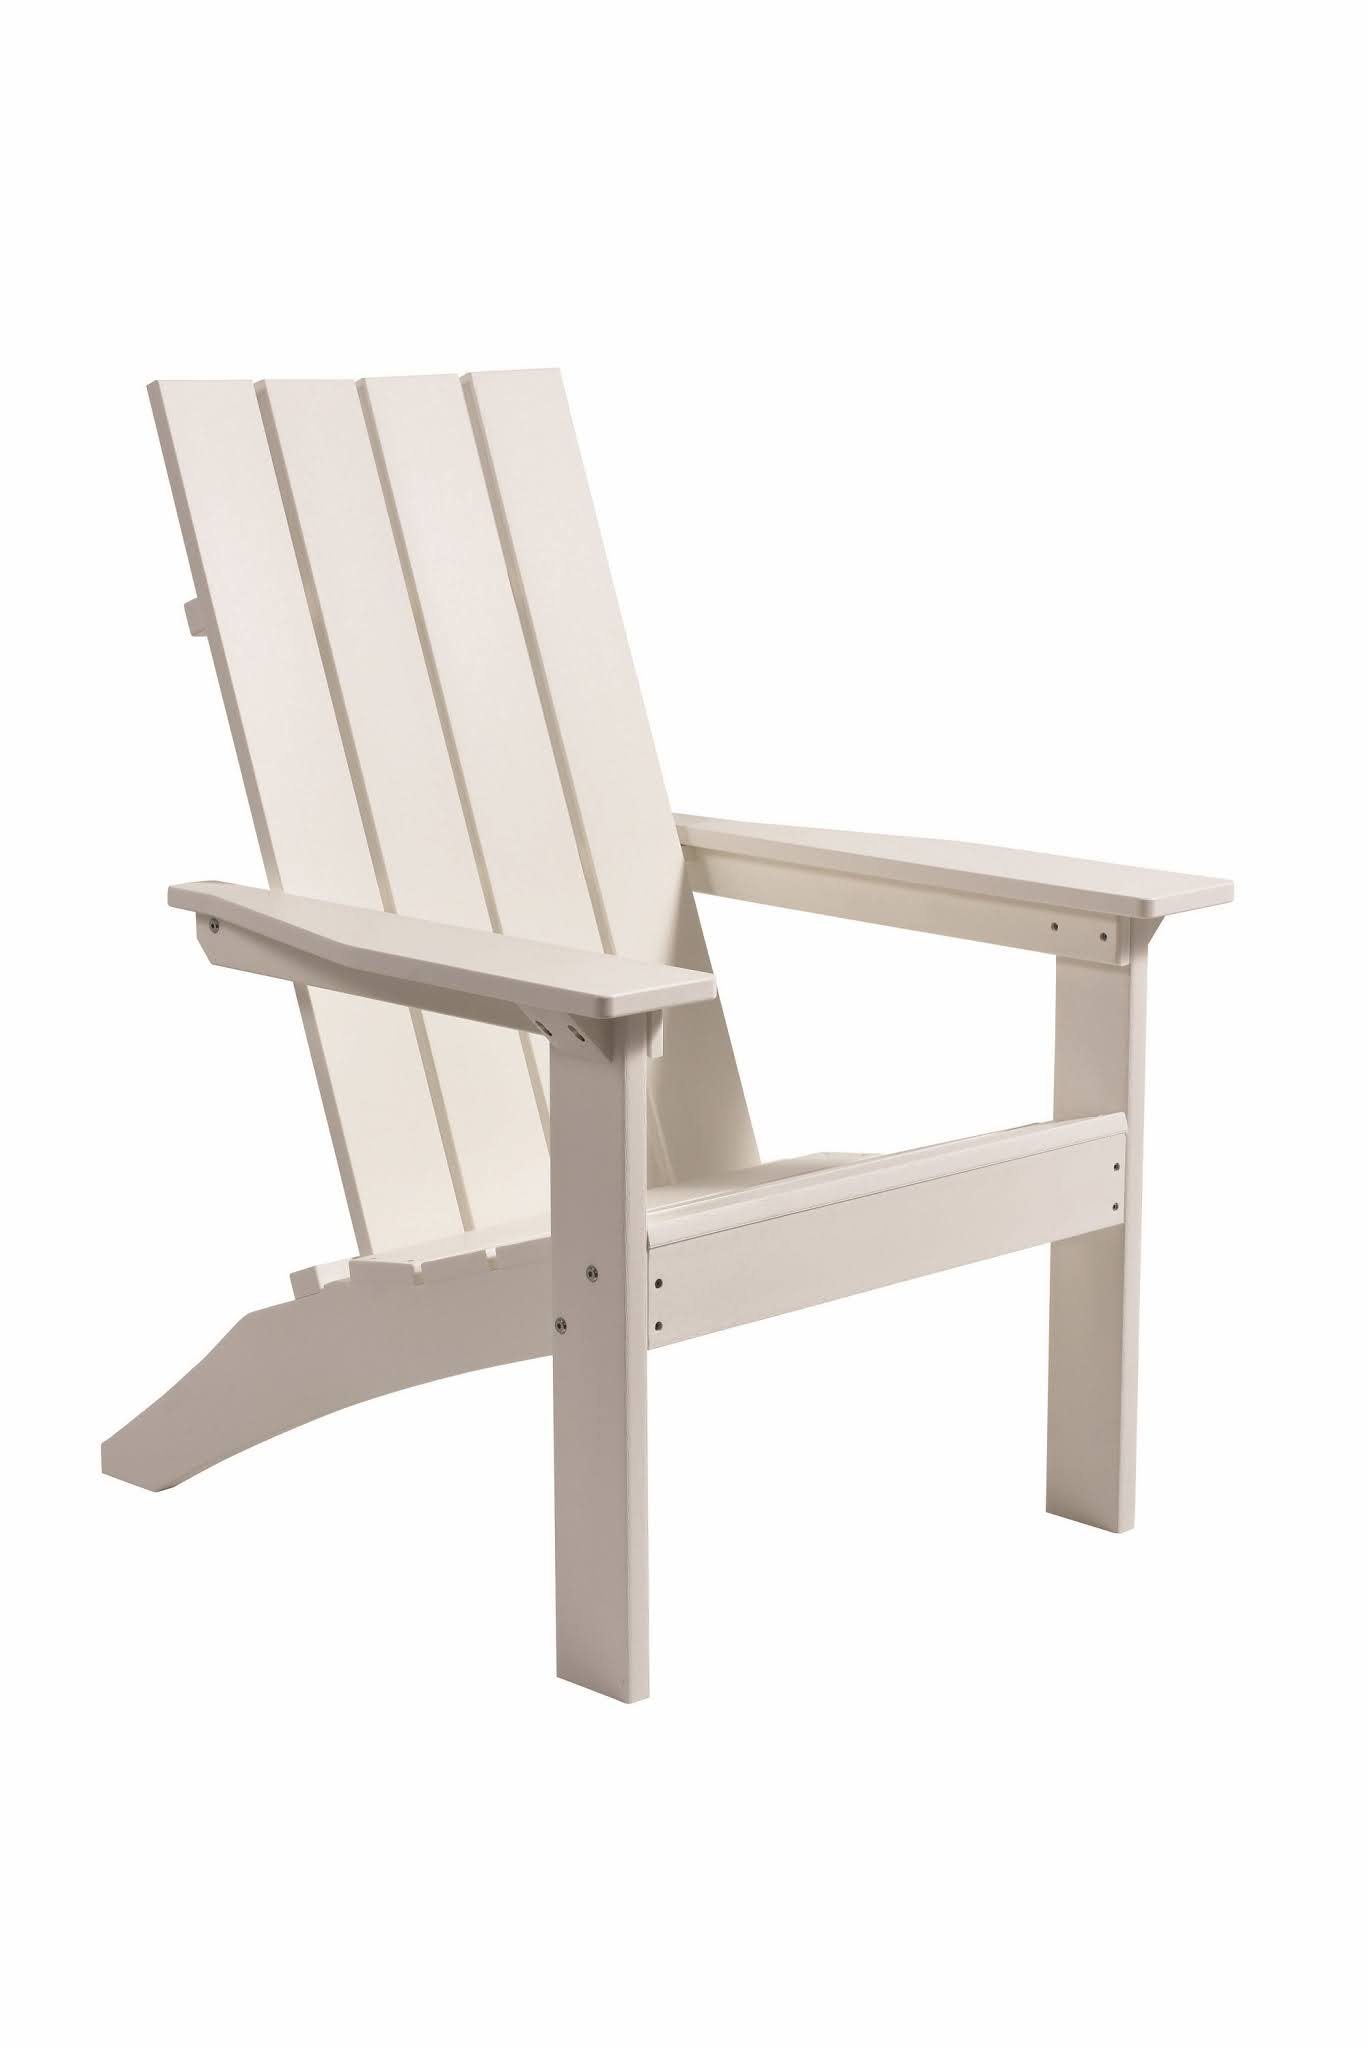 Berlin Gardens Mayhew Poly Adirondack Chair From Dutchcrafters Amish 